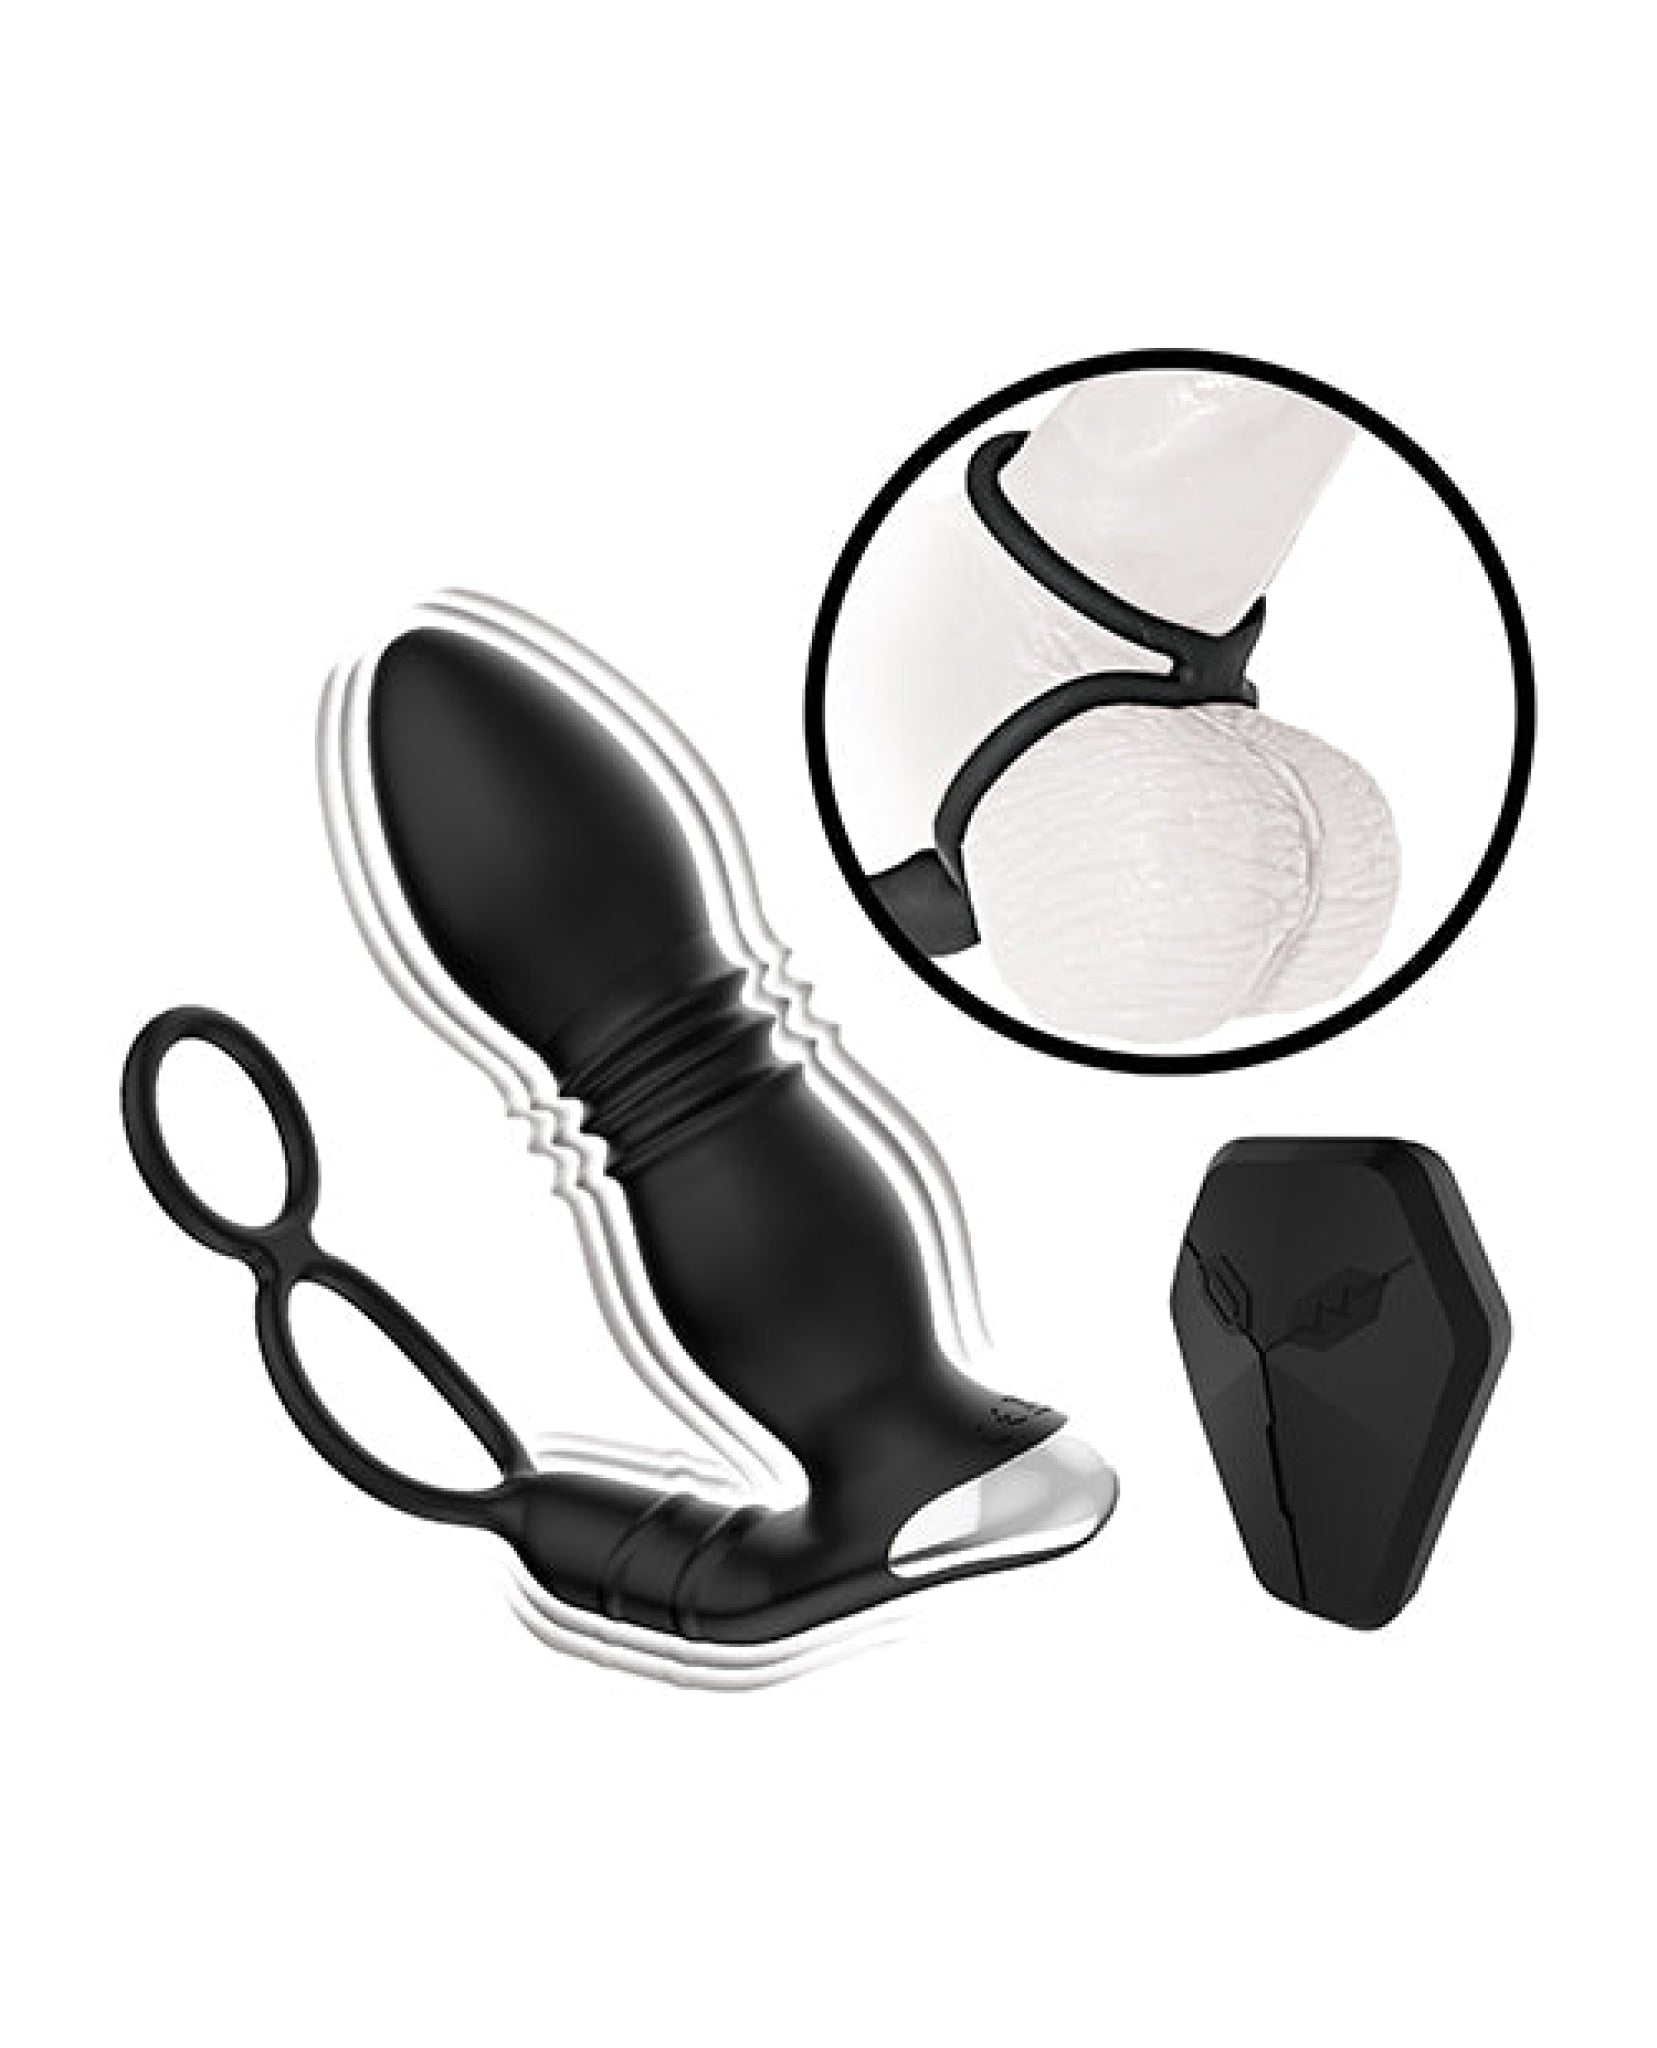 Ass-station Remote Prostate Power Plug w/Cock & Ball Ring - Black Nasstoys